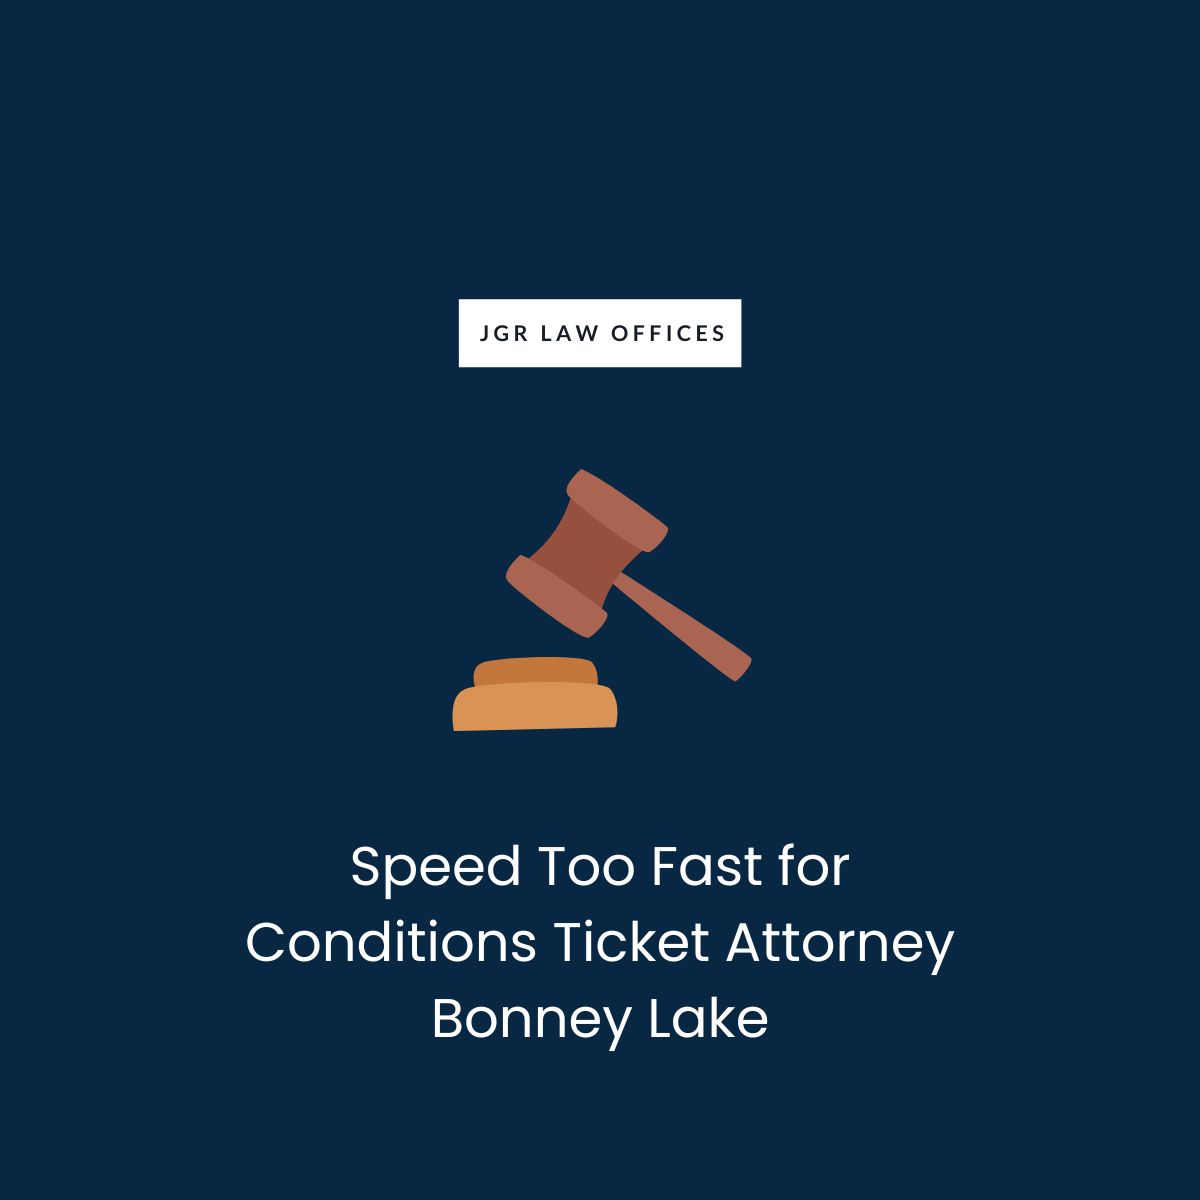 Speed Too Fast for Conditions Ticket Attorney Bonney Lake